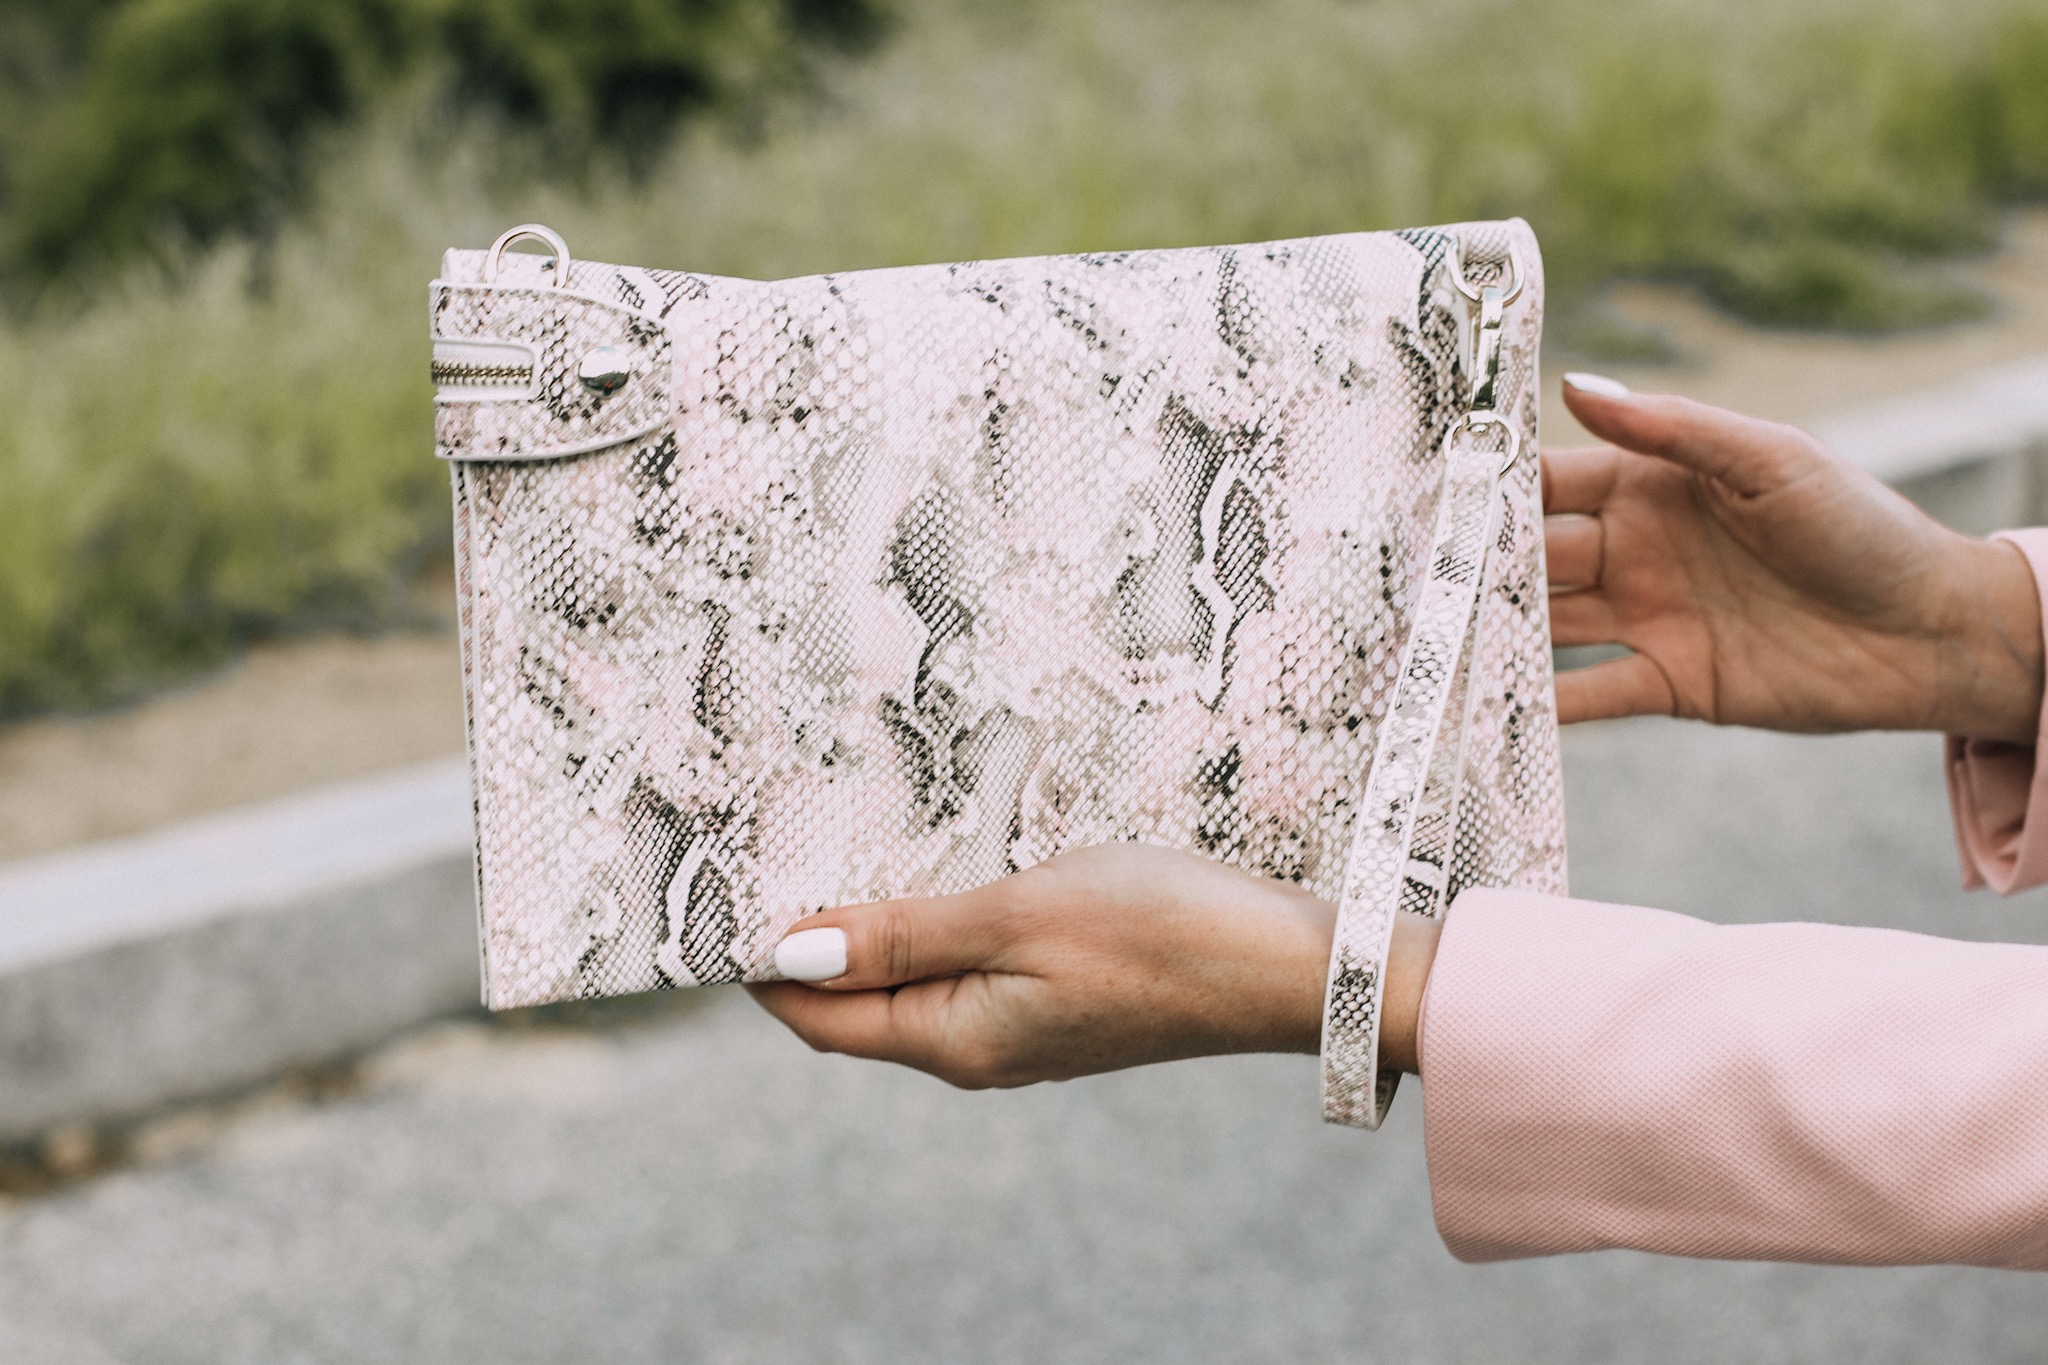 Spring Office Outfits, Fashion blogger Erin Busbee of BusbeeStyle.com holding a pink snake print clutch from White House Black Market in Sequoia National Park